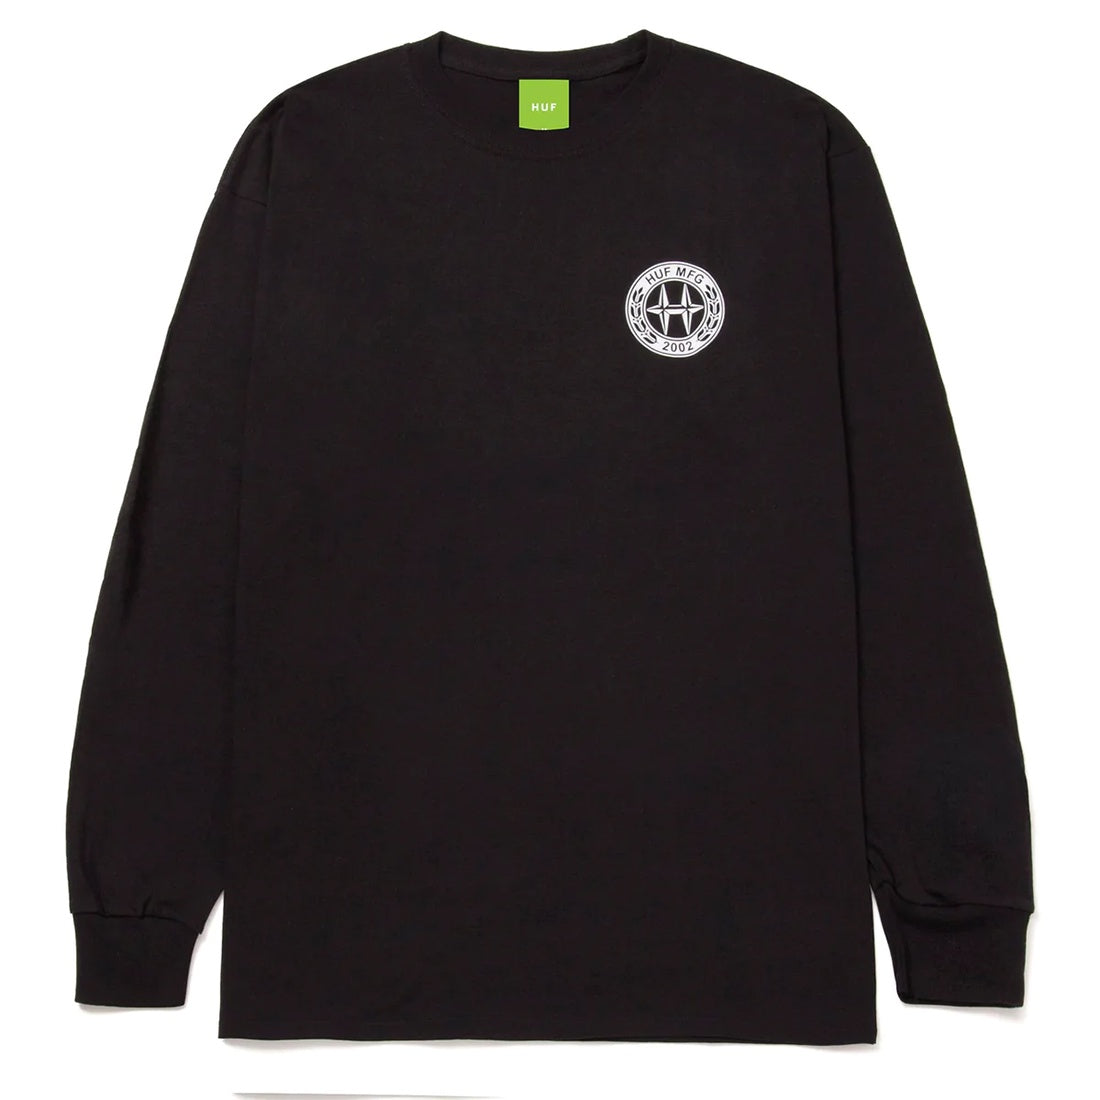 Downtown Spinning L/S Tee Black